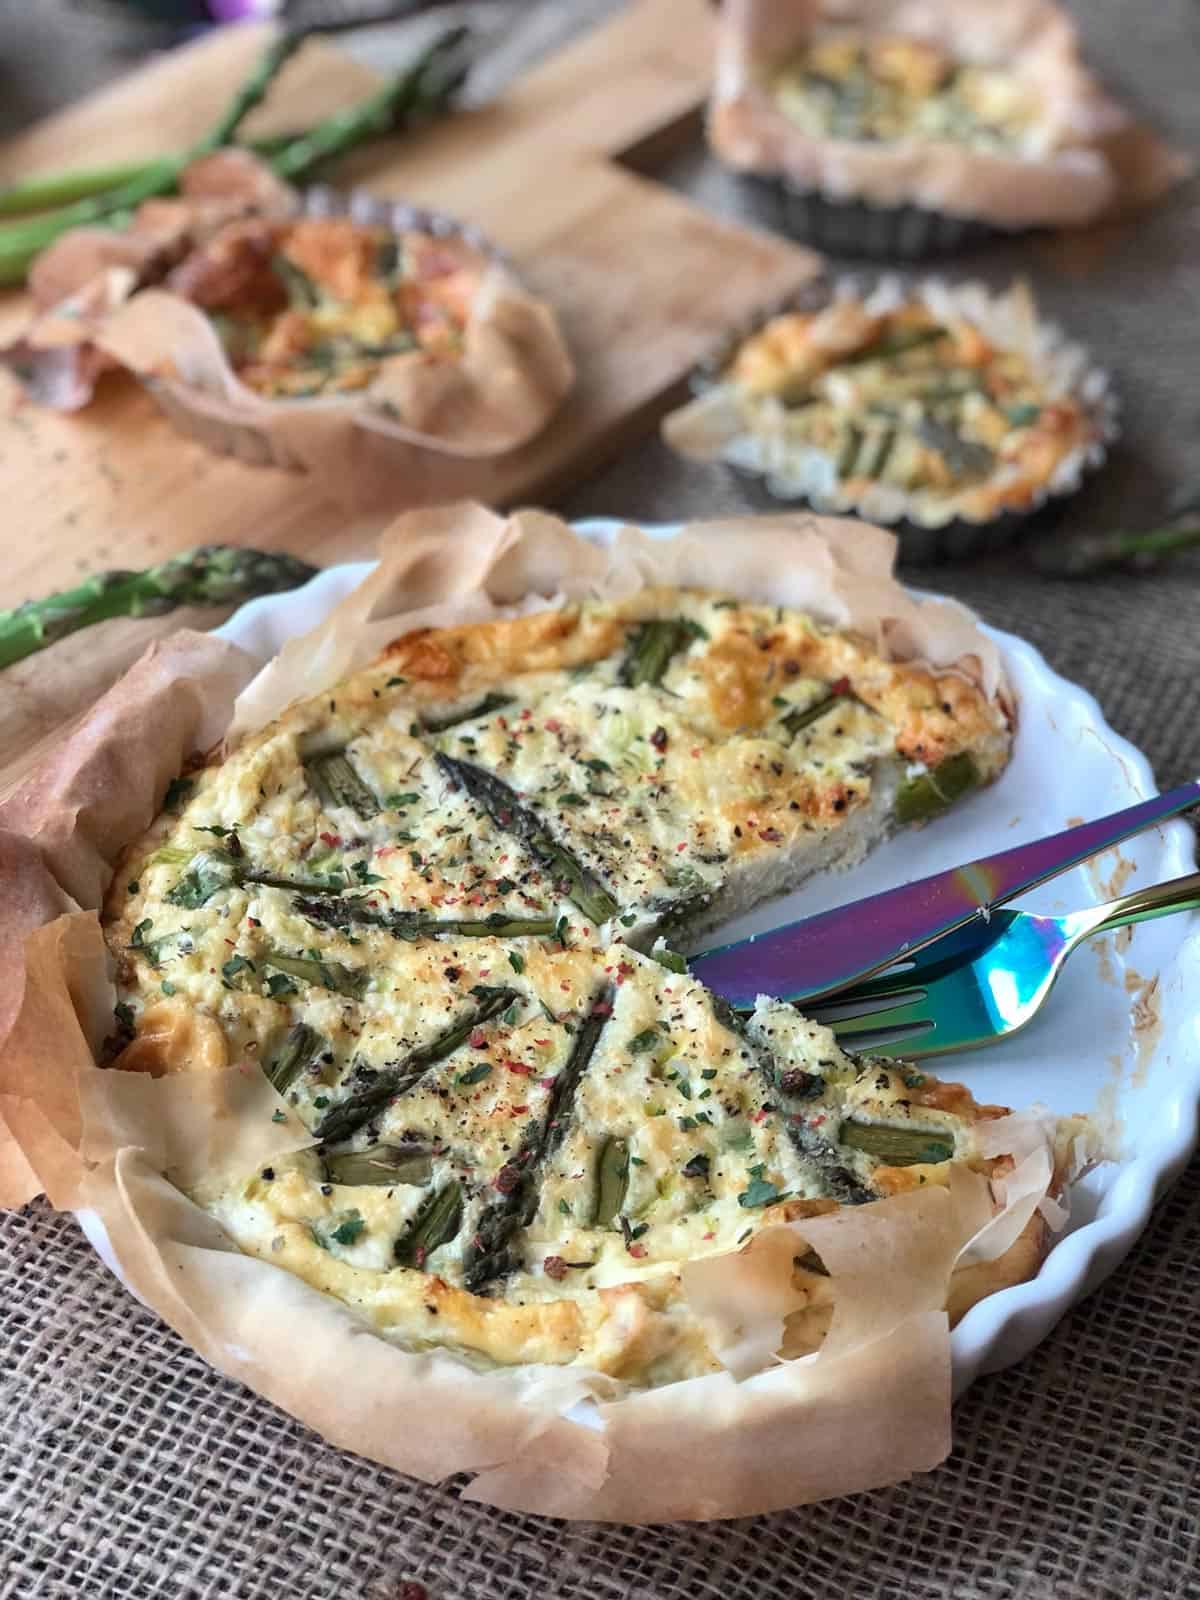 Filo quiche with asparagus on a plate, a slice taken, a fork and a knife on the side.